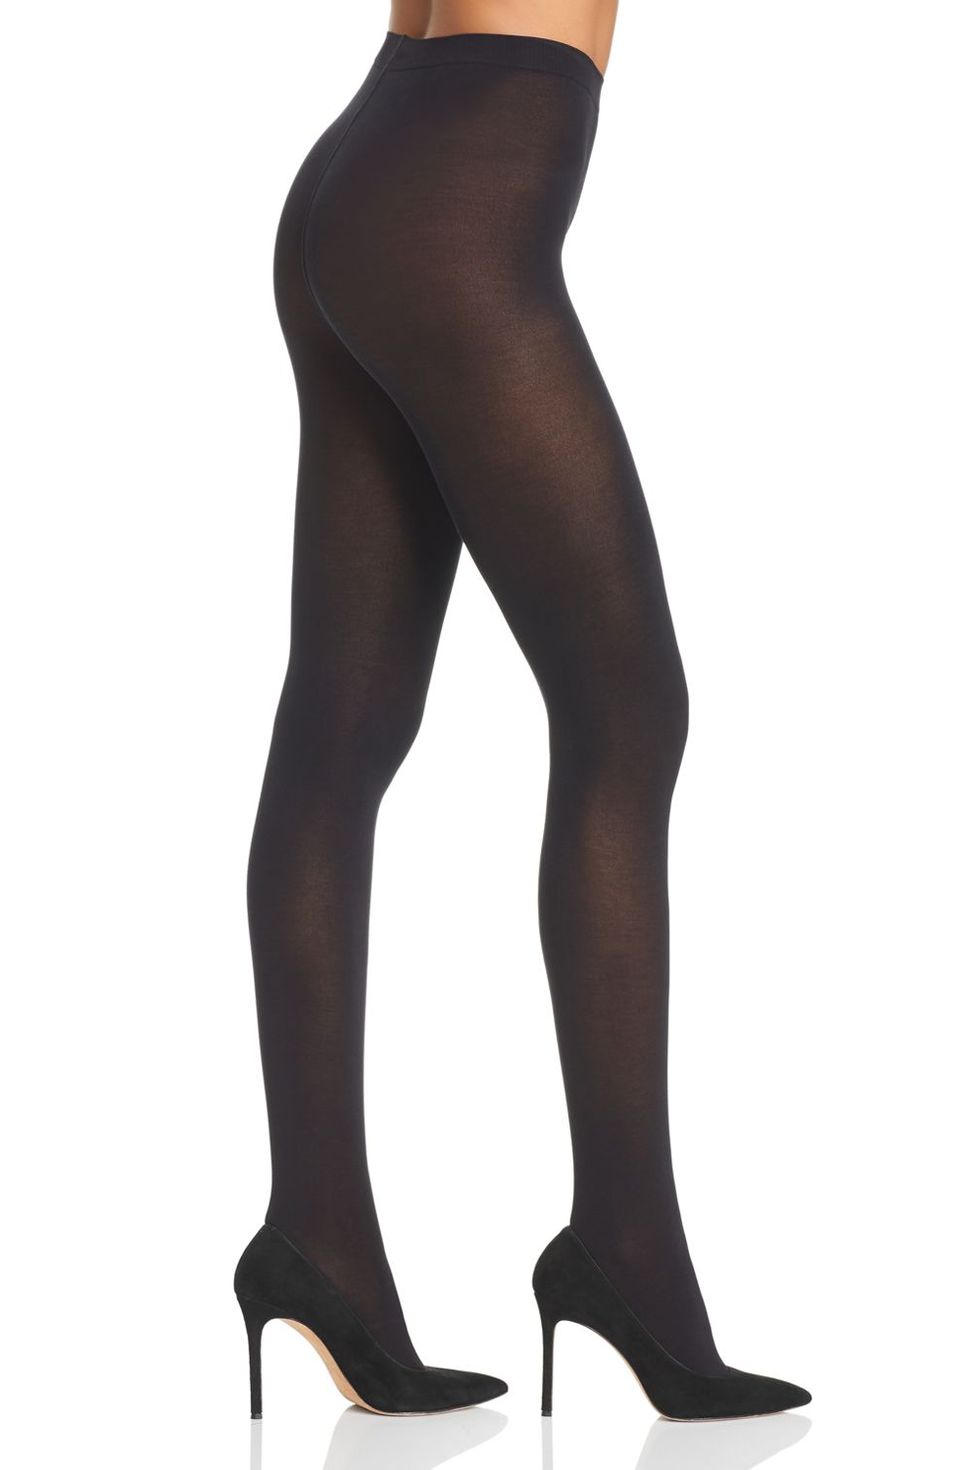  Hipstik Black Tights for Women, Opaque Tights with Comfort  Lace Top